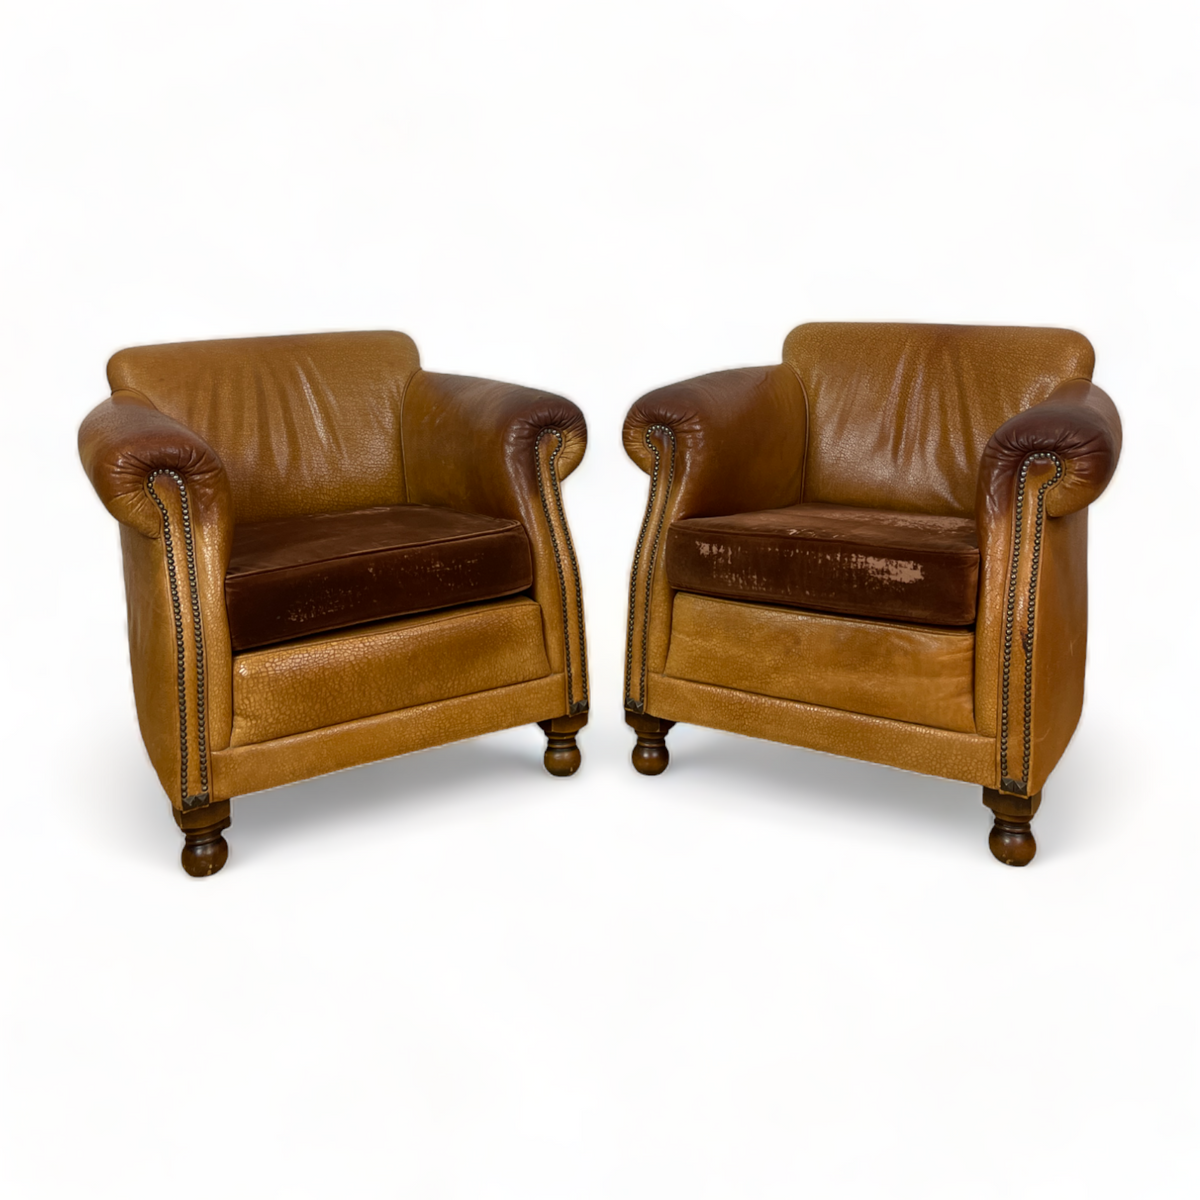 Pair of Deco Leather Club Chairs